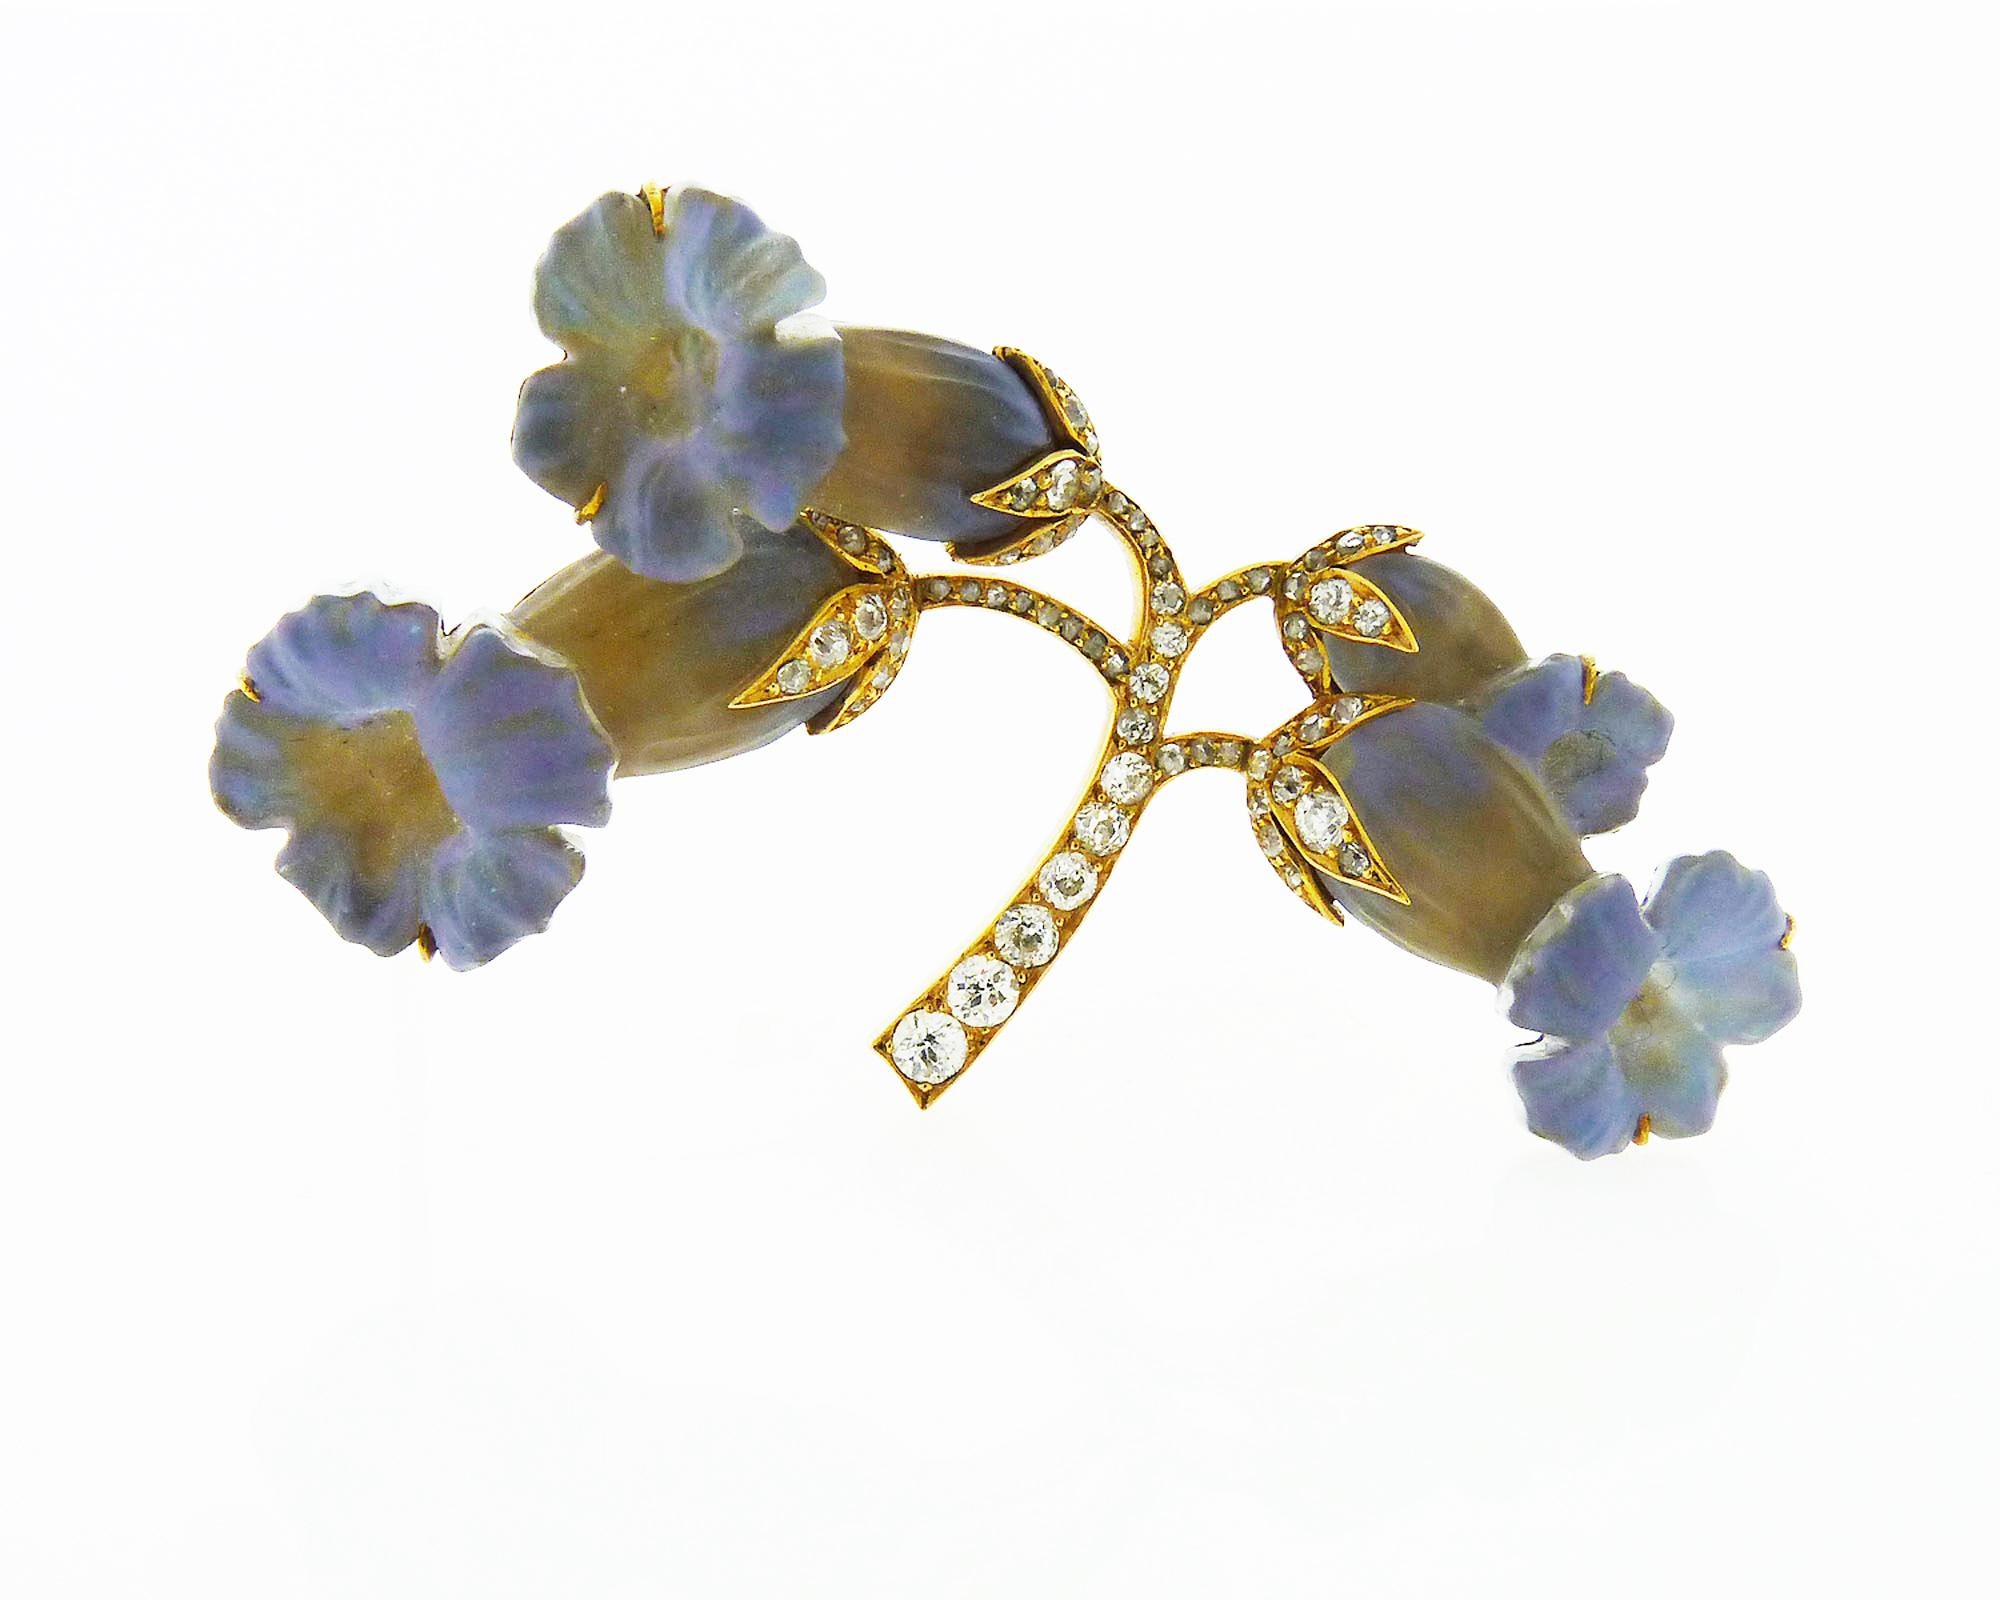 René Lalique (1860-1945), the indisputable genius of Art Nouveau taking form botanical and feminine inspiration to create this beautiful brooch.

Designed as a spray of daffodils composed of carved bluish gray glass,
the stems set with rose-cut